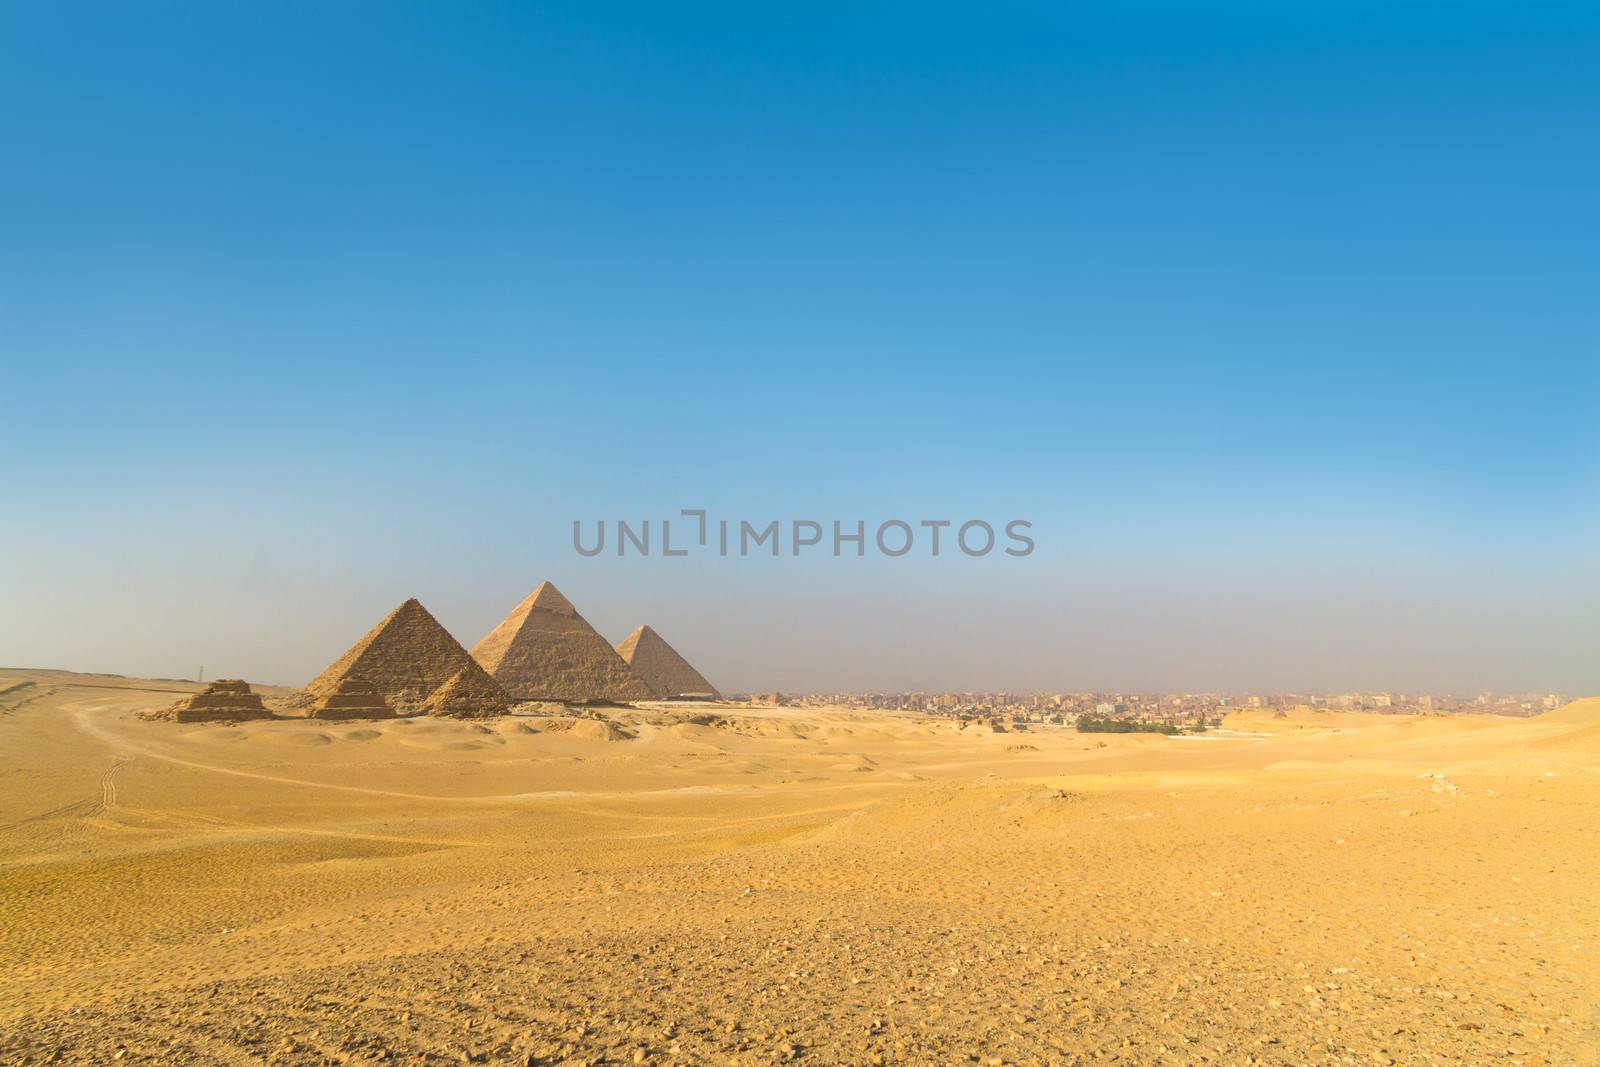 The pyramids of Giza, Cairo, Egypt;  the oldest of the Seven Wonders of the Ancient World, and the only one to remain largely intact